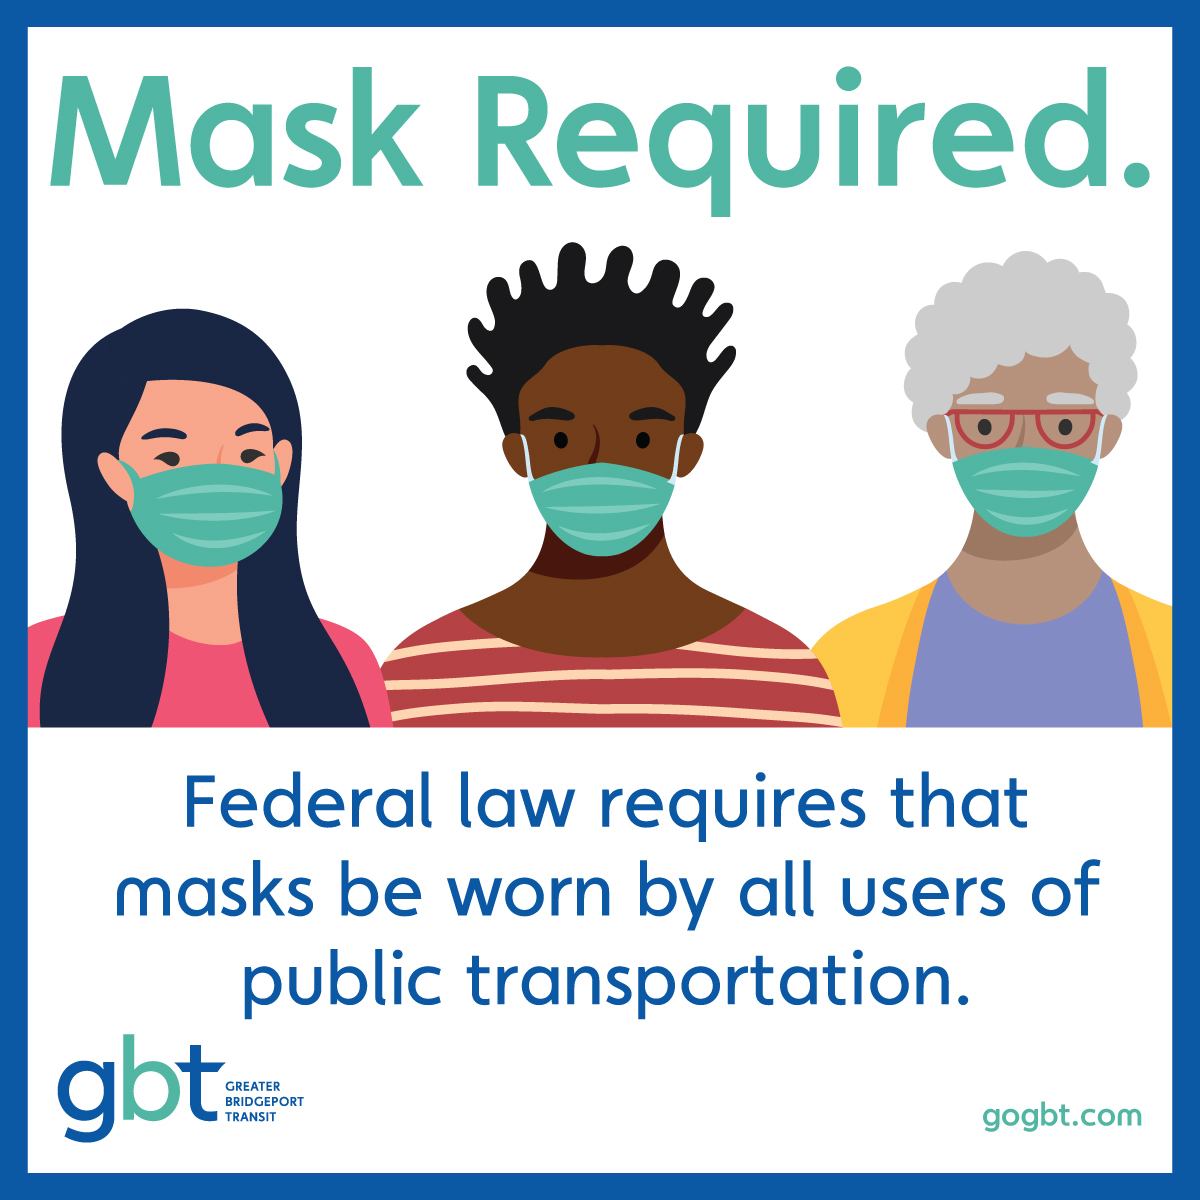 Masks Required.